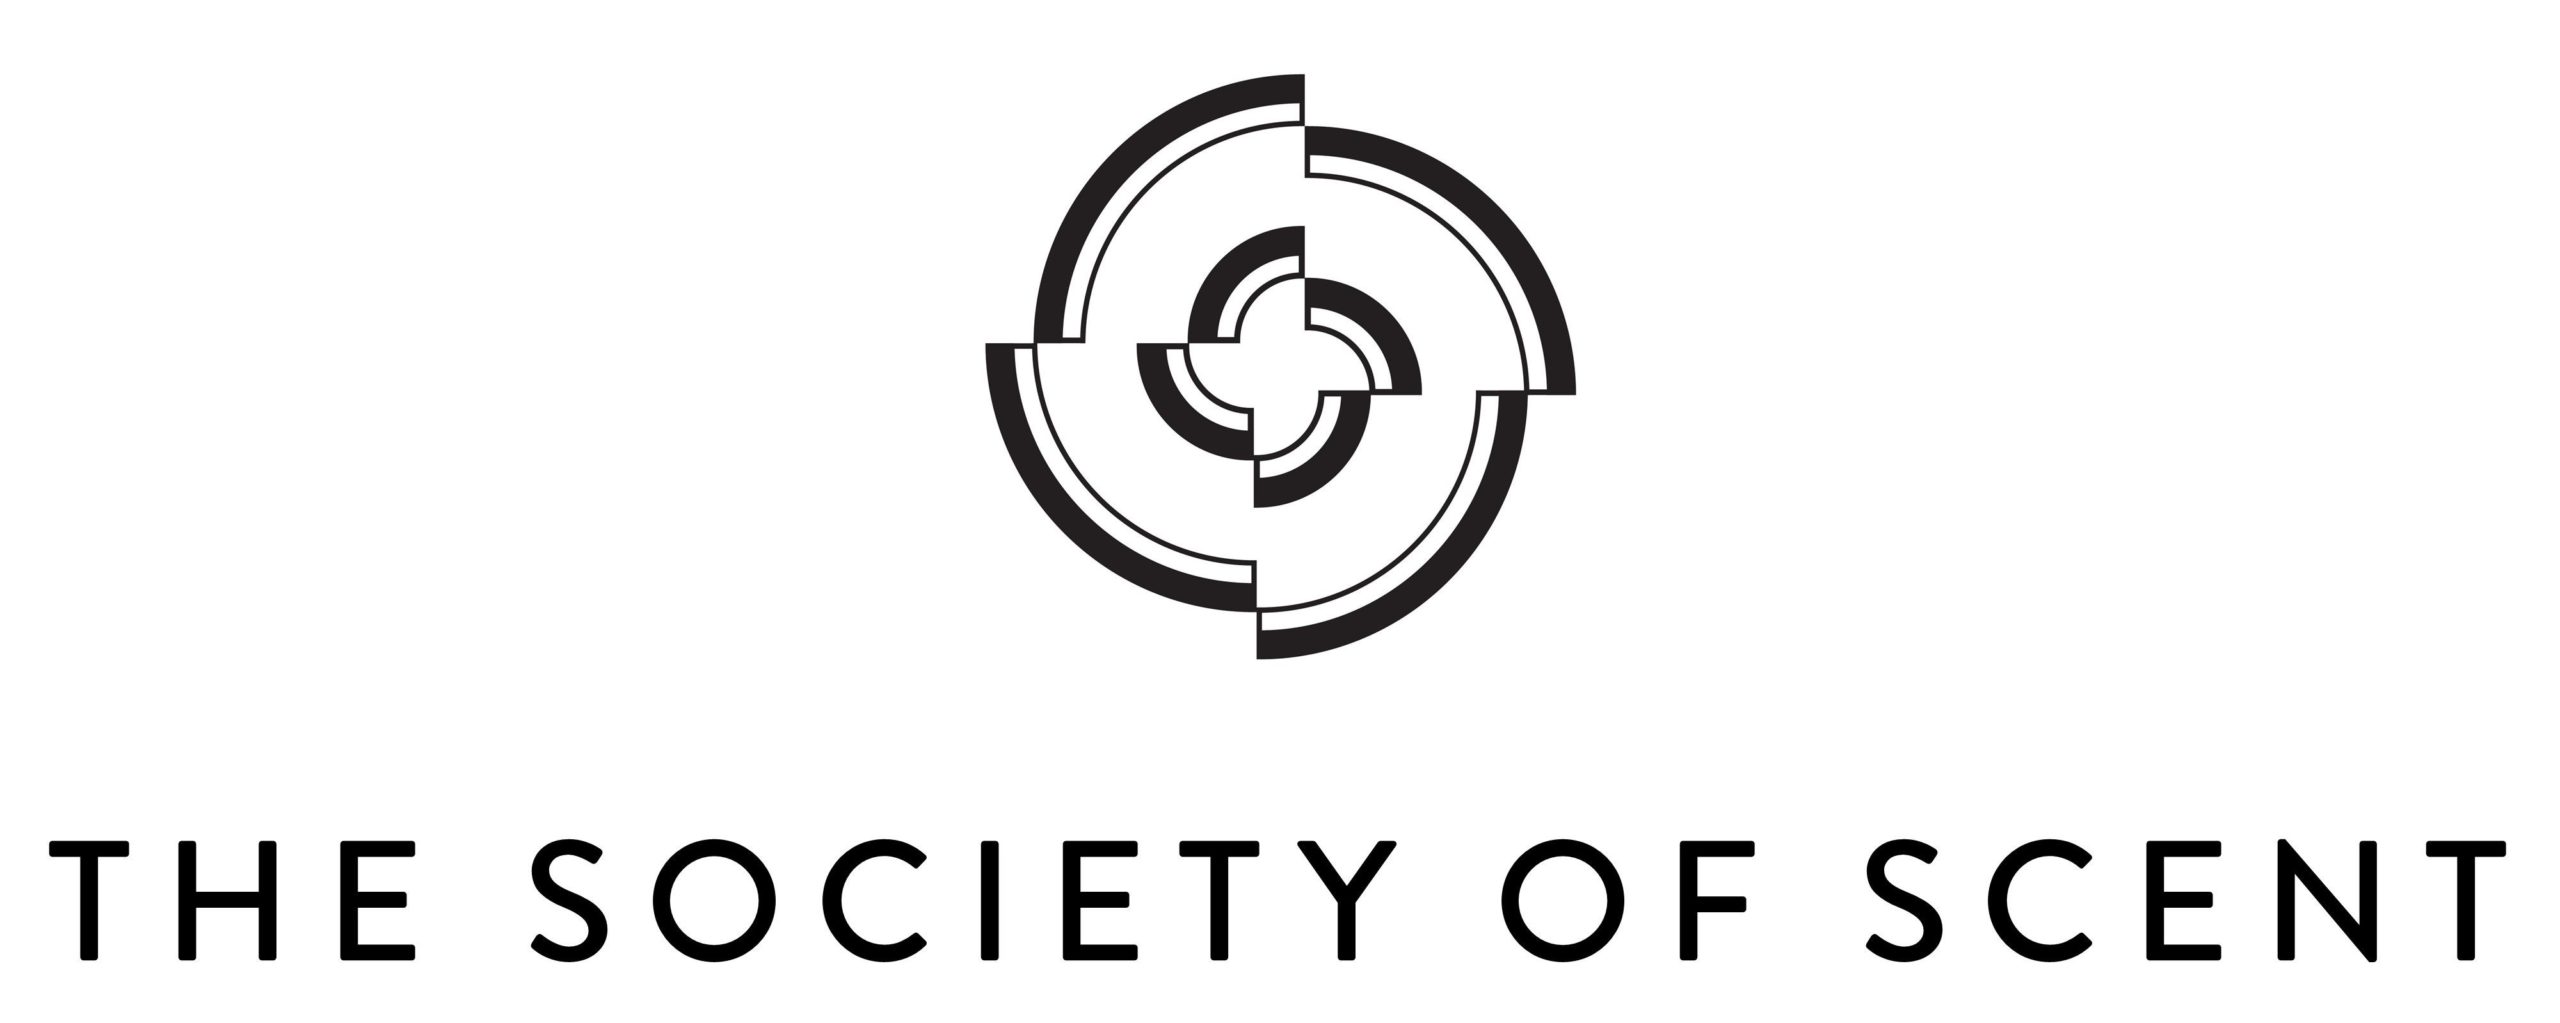 The Society of Scent logo